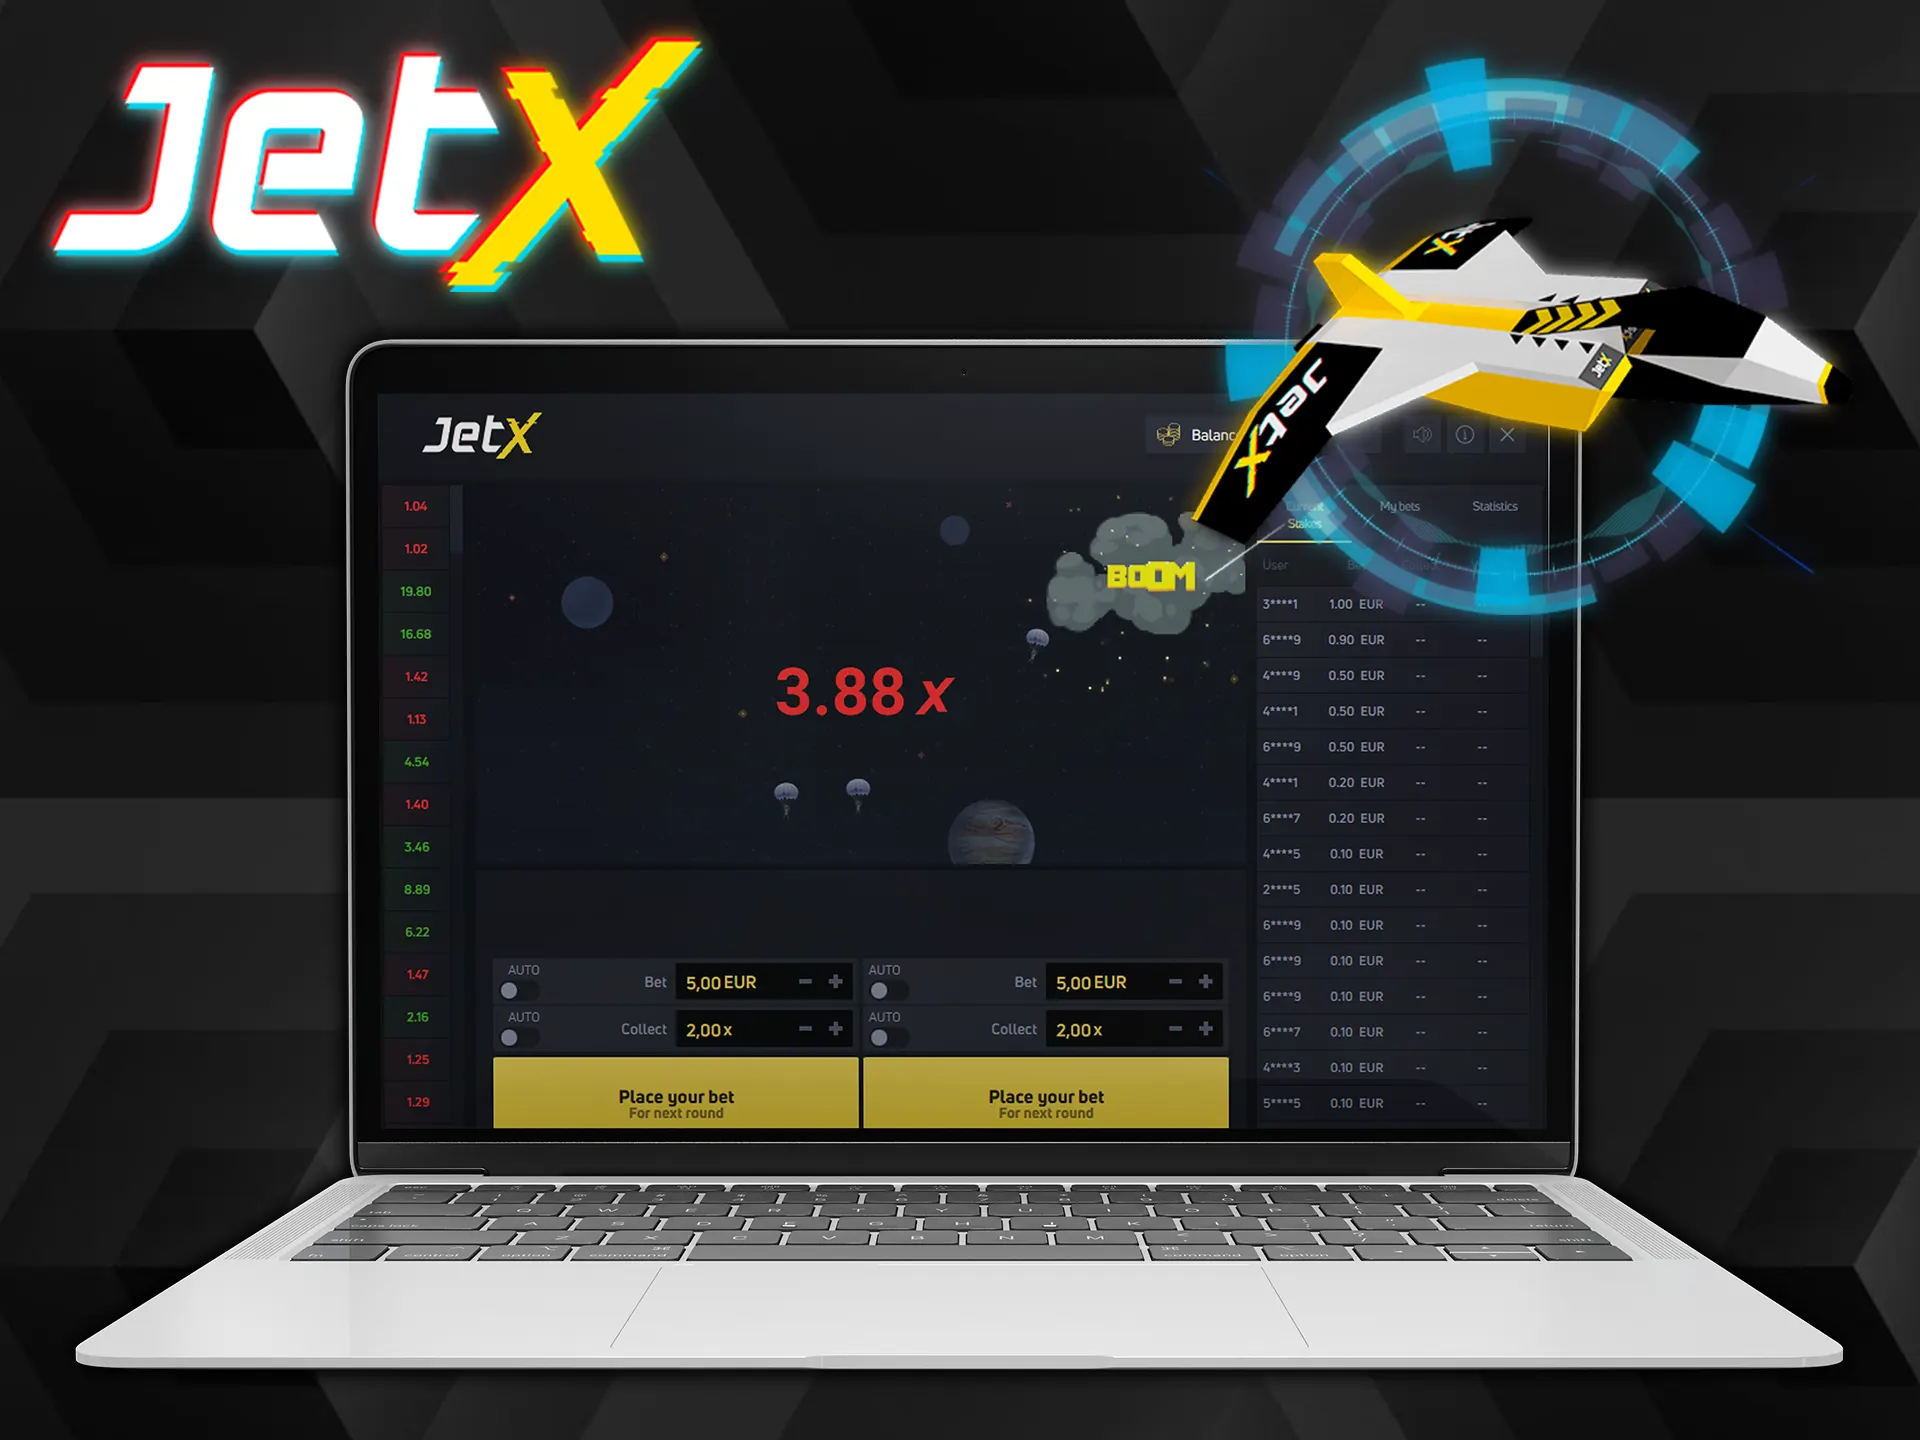 Bet on your favorite jet in the JetX game.